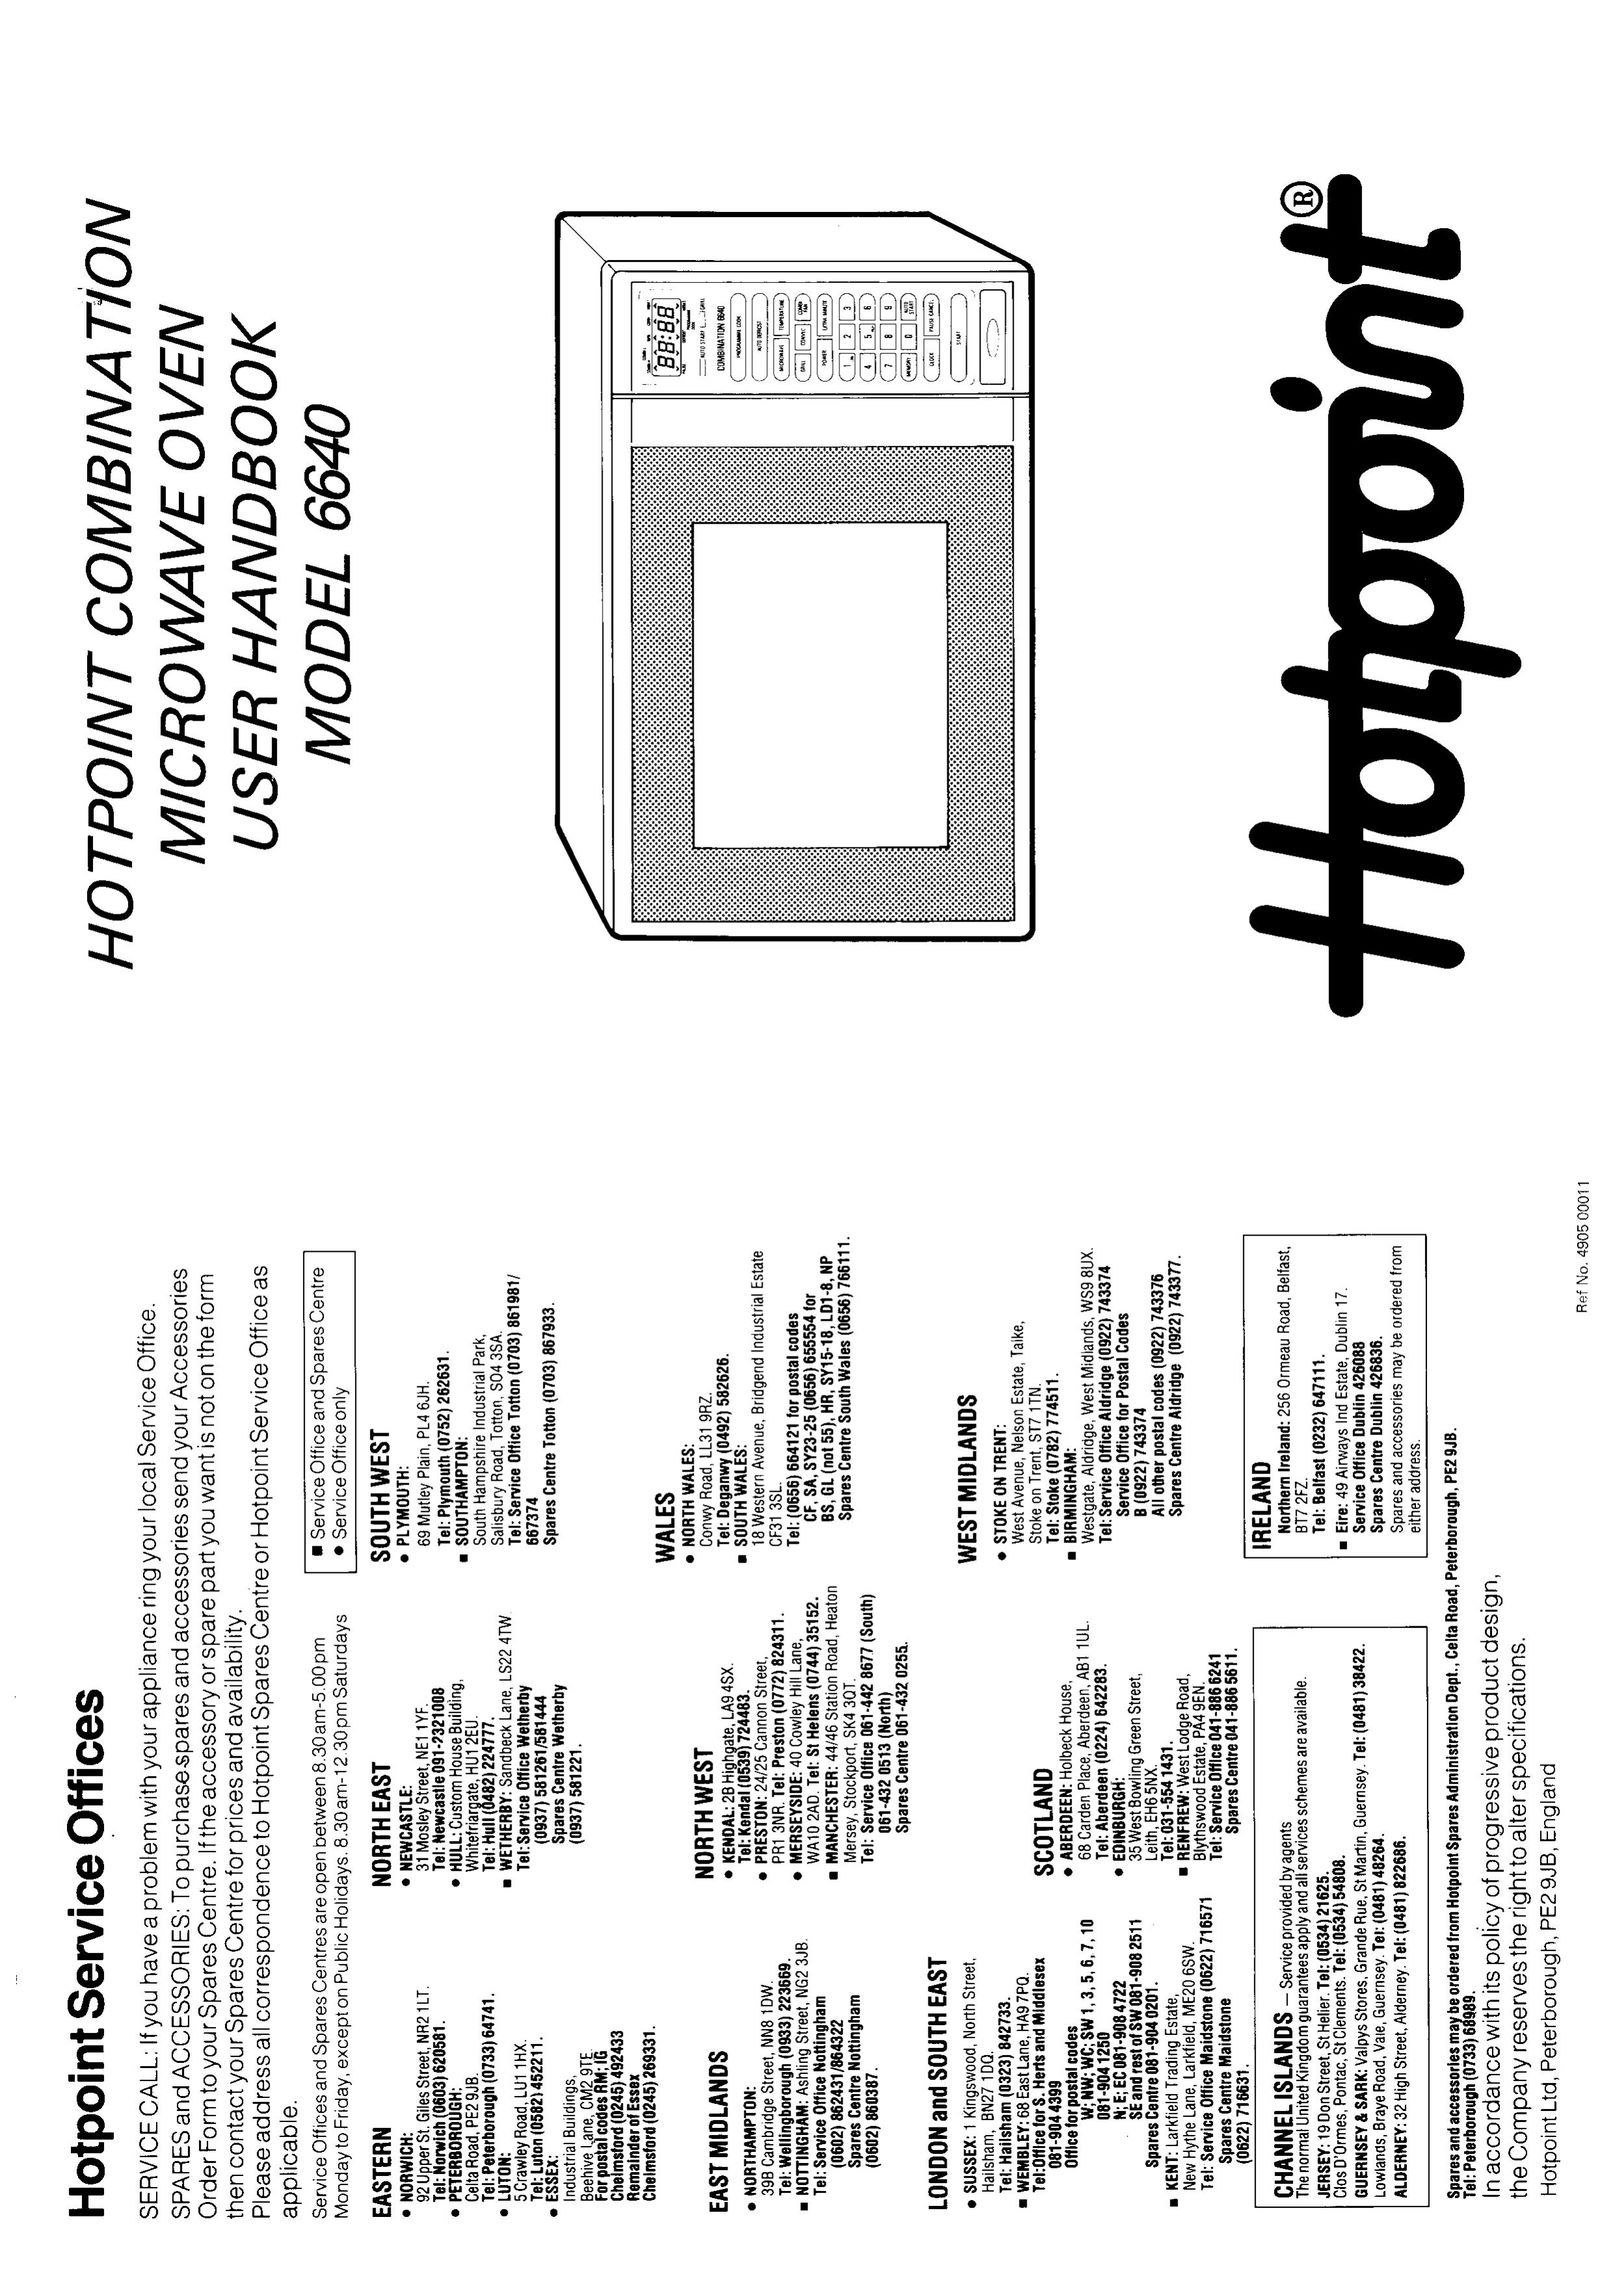 Hotpoint 6640 Microwave Oven User Manual